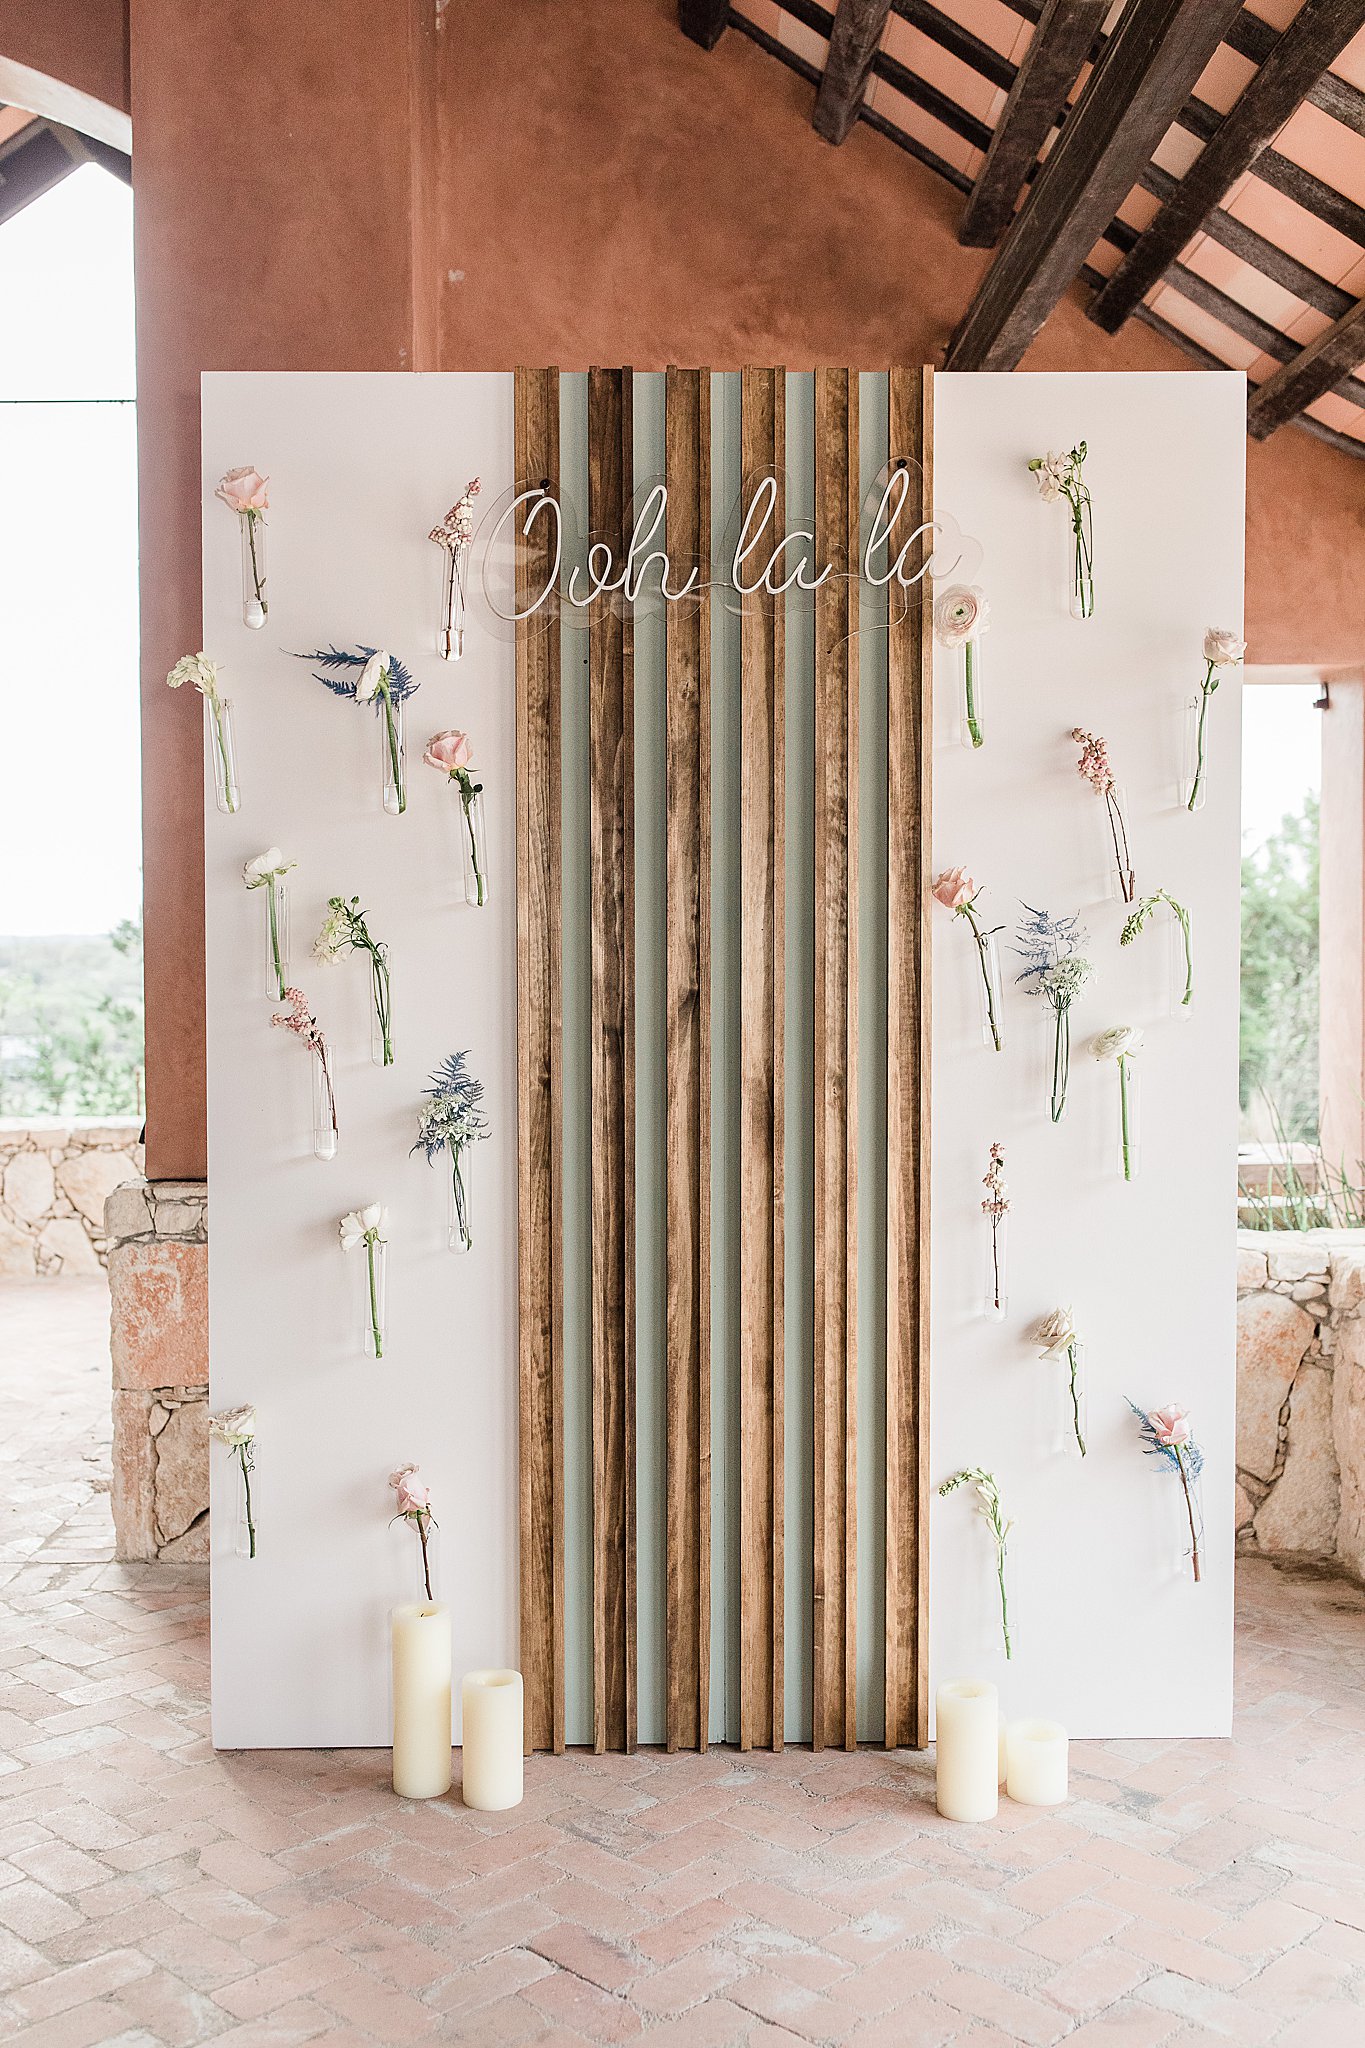 Ooh La La Flower vases and wood creative photo drop background at Camp Lucy by Anna Kay Photography